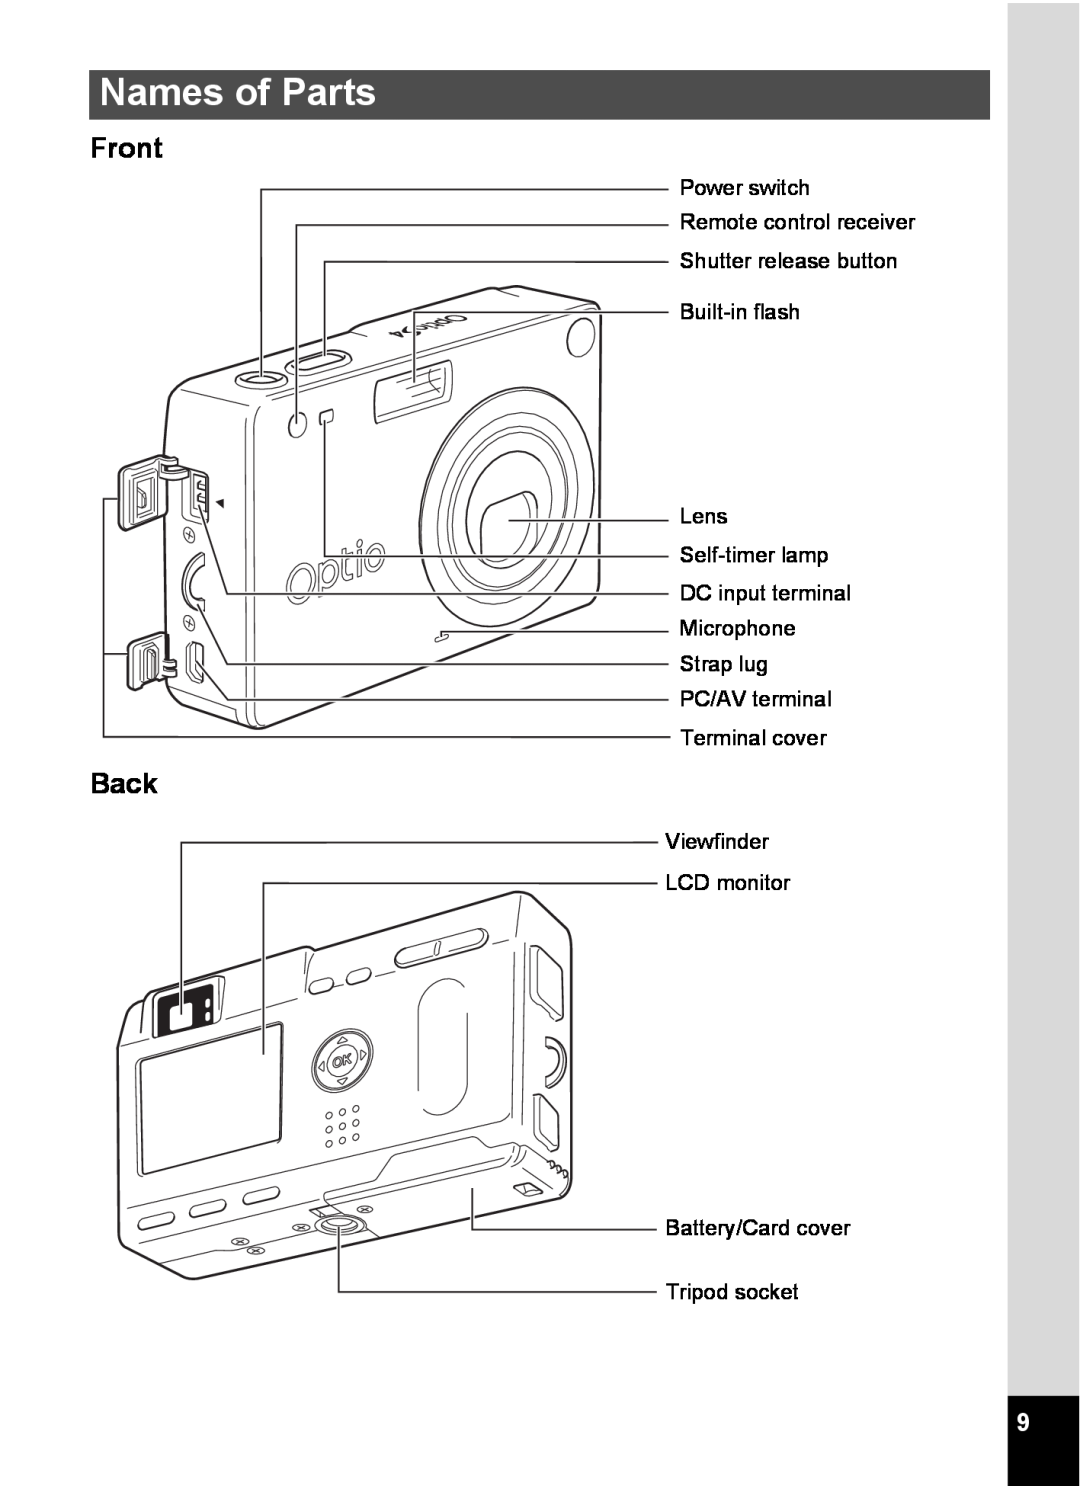 Pentax S4 manual Names of Parts, Front, Back 